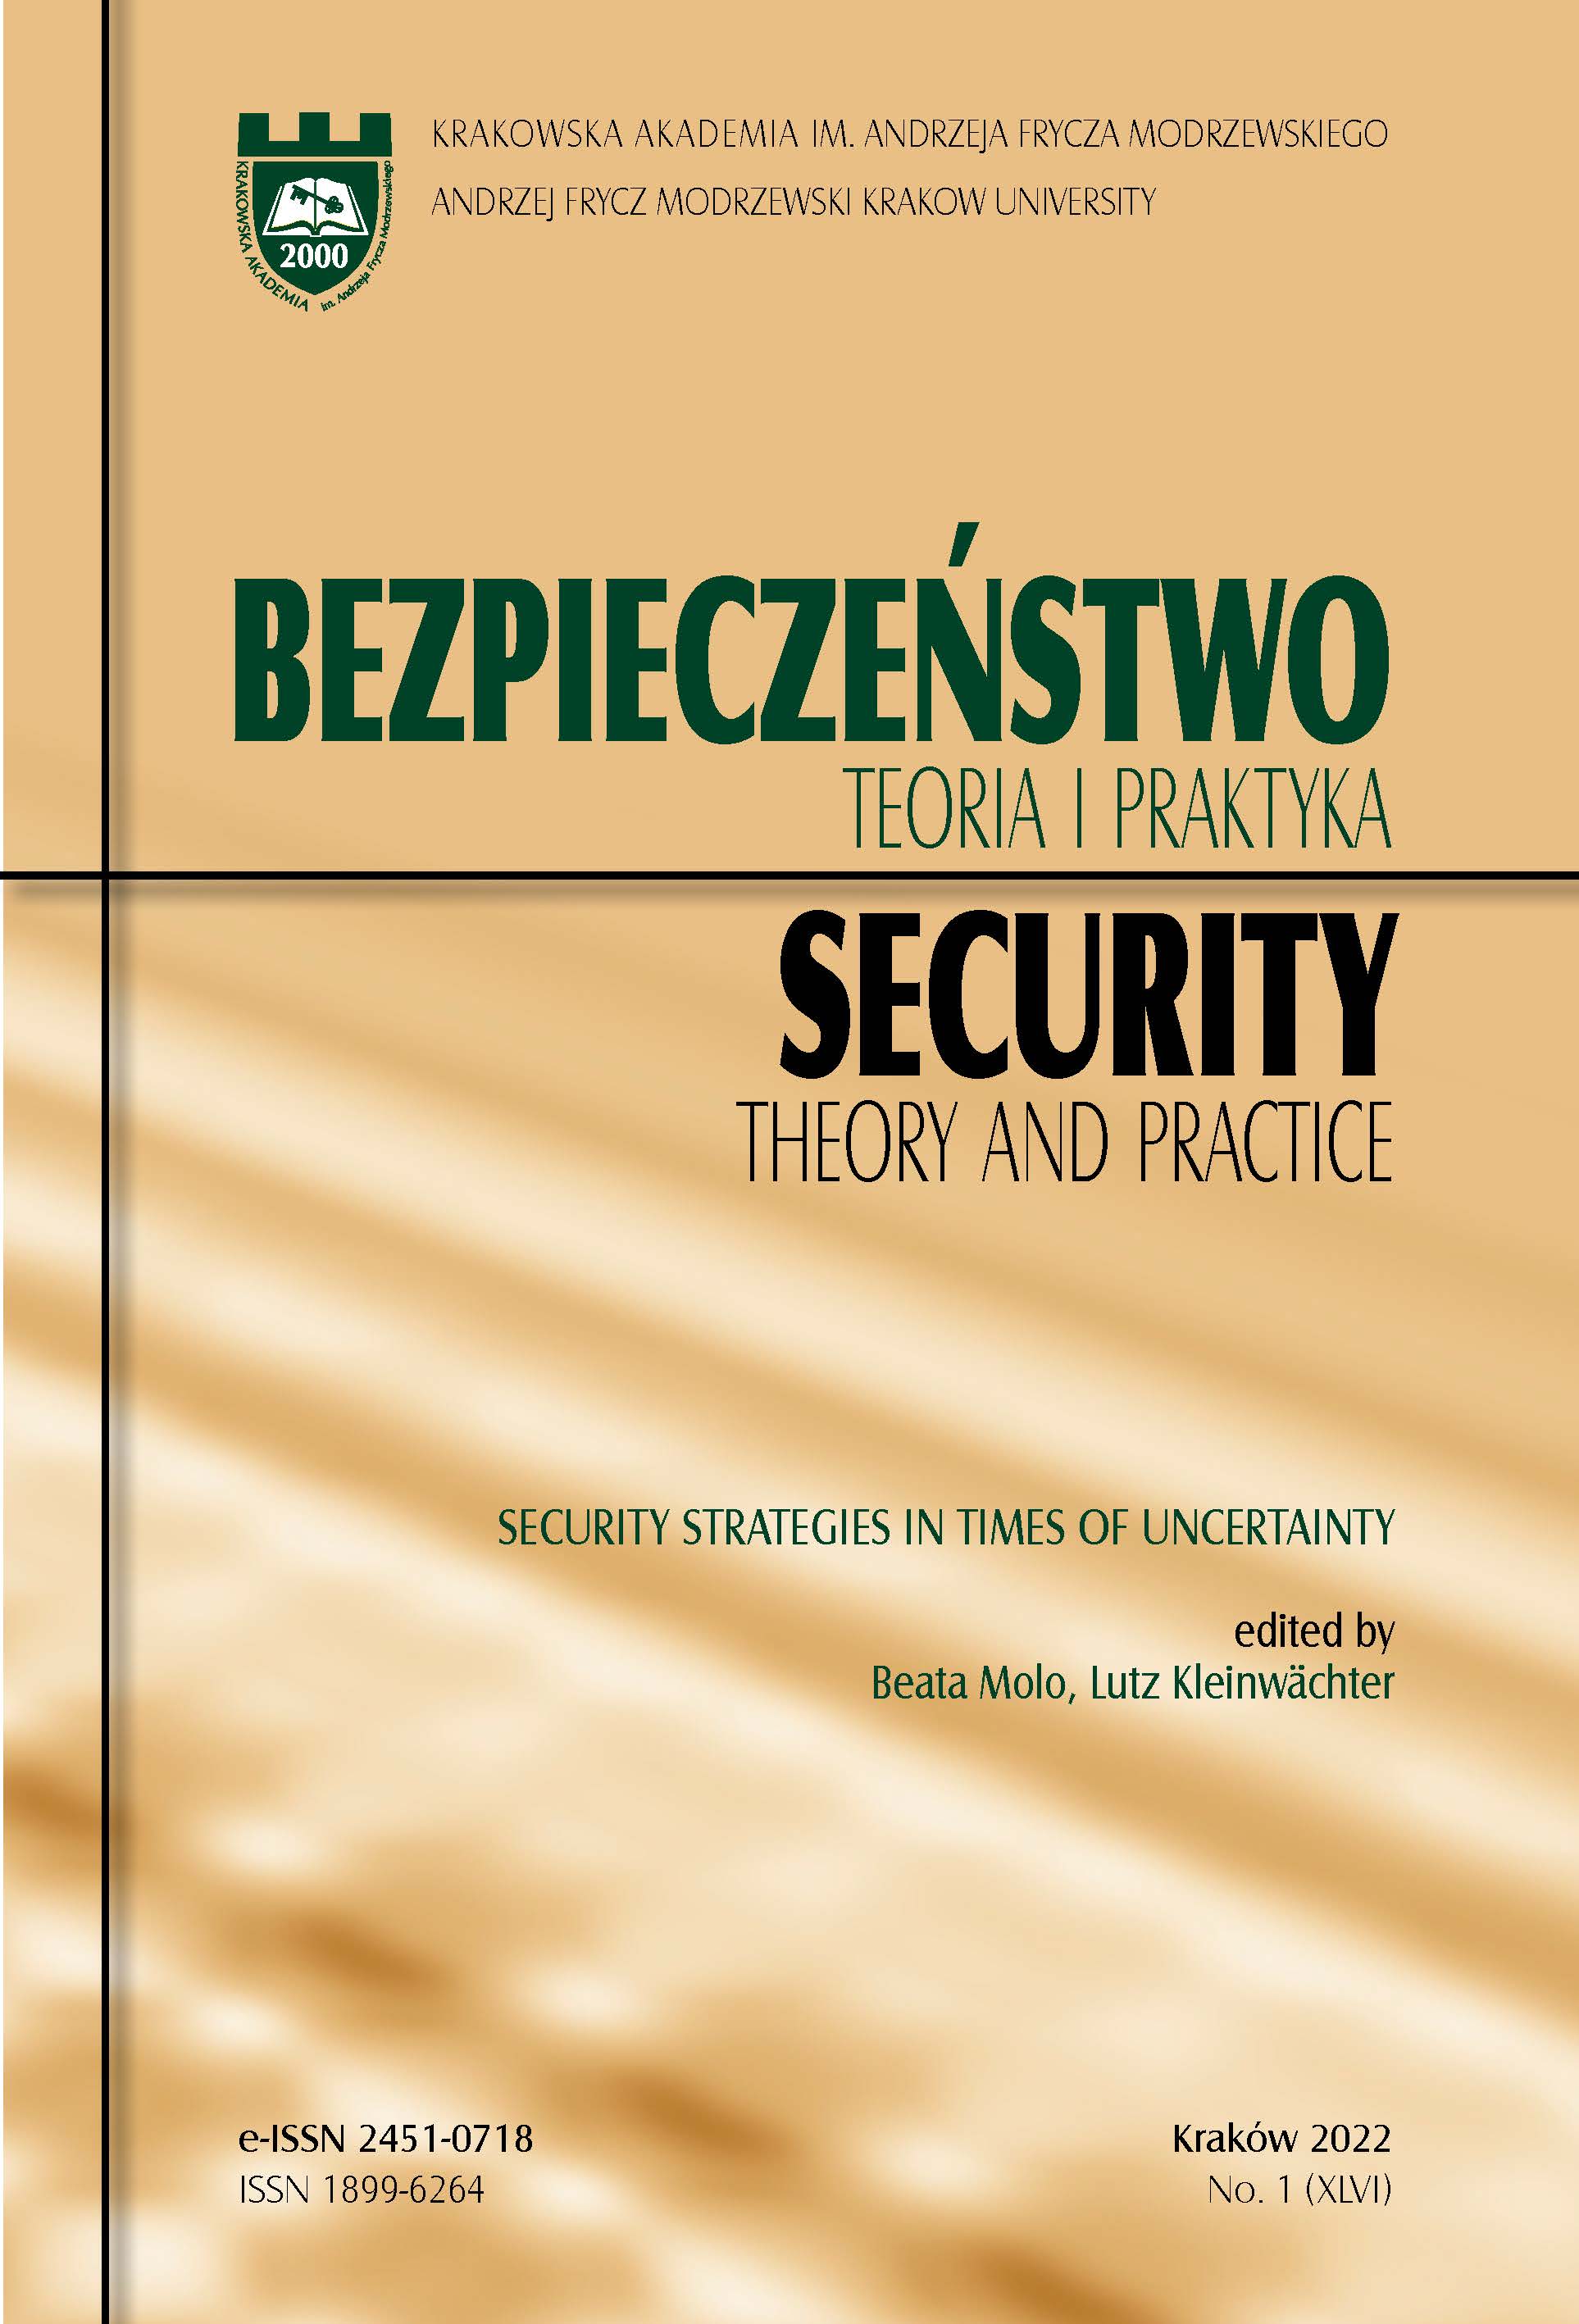 Demography as a security strategy factor in Poland and the Russian Federation